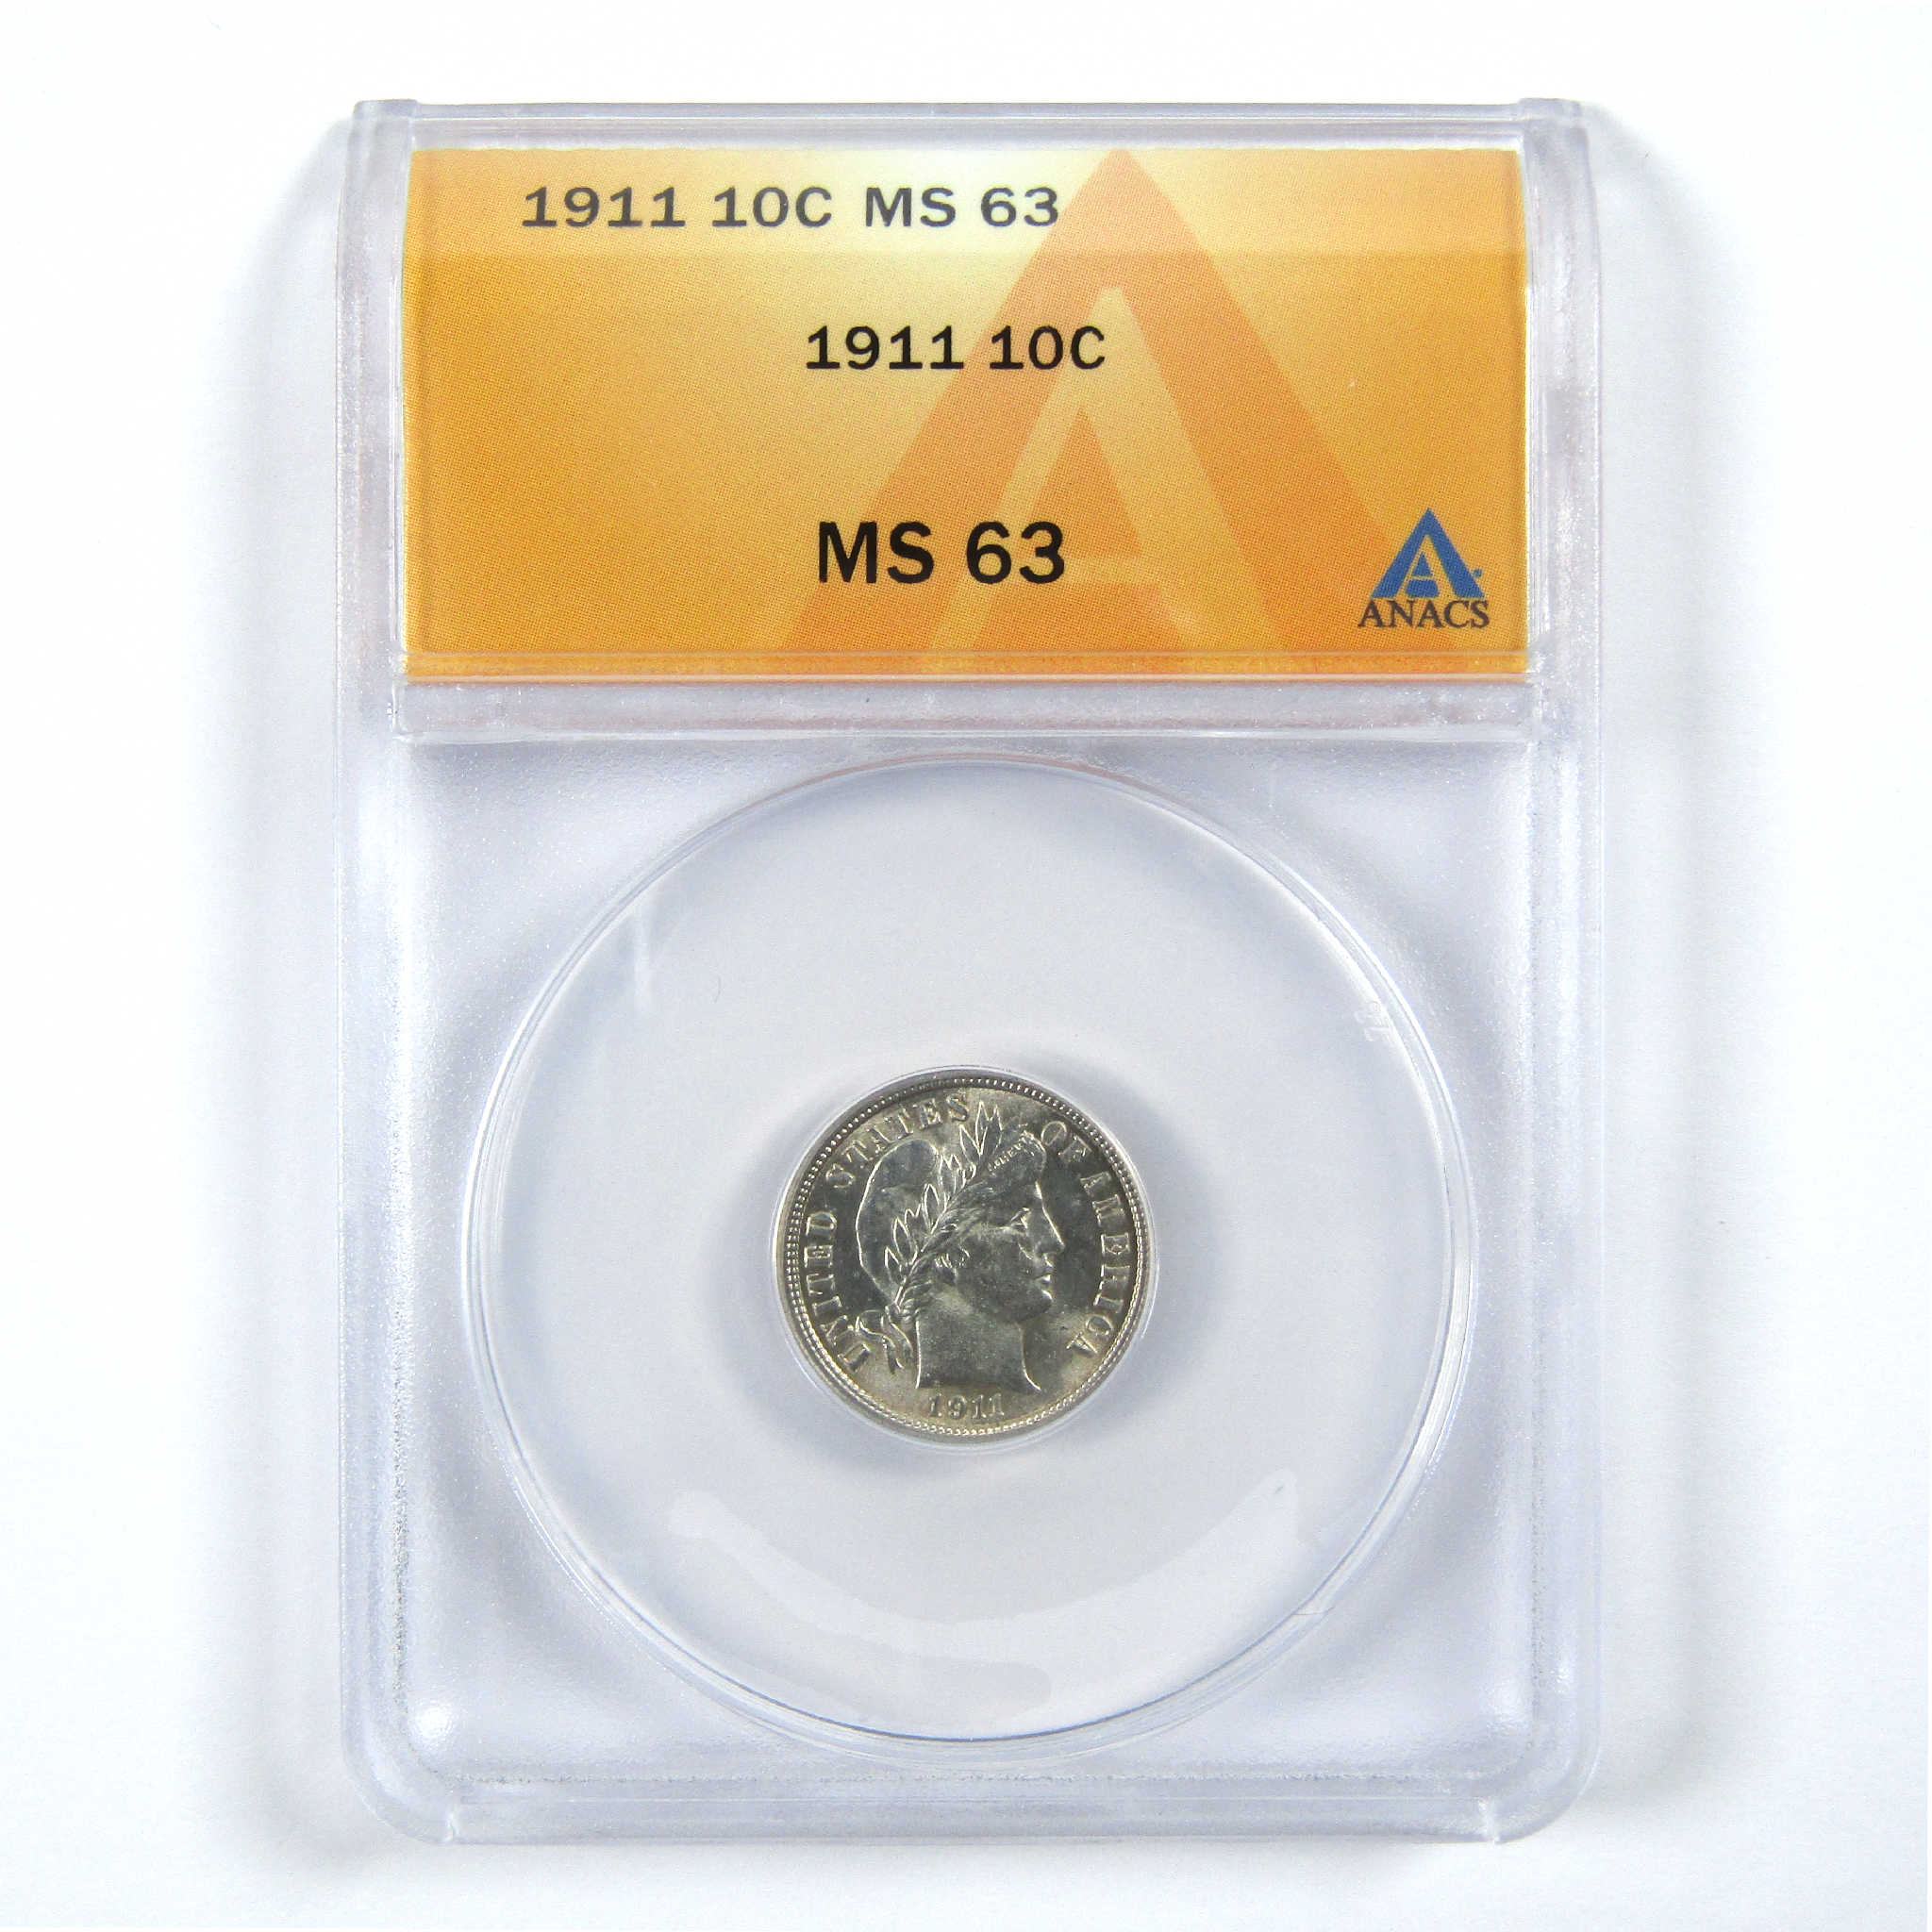 1911 Barber Dime MS 63 ANACS Silver 10c Uncirculated Coin SKU:I11935